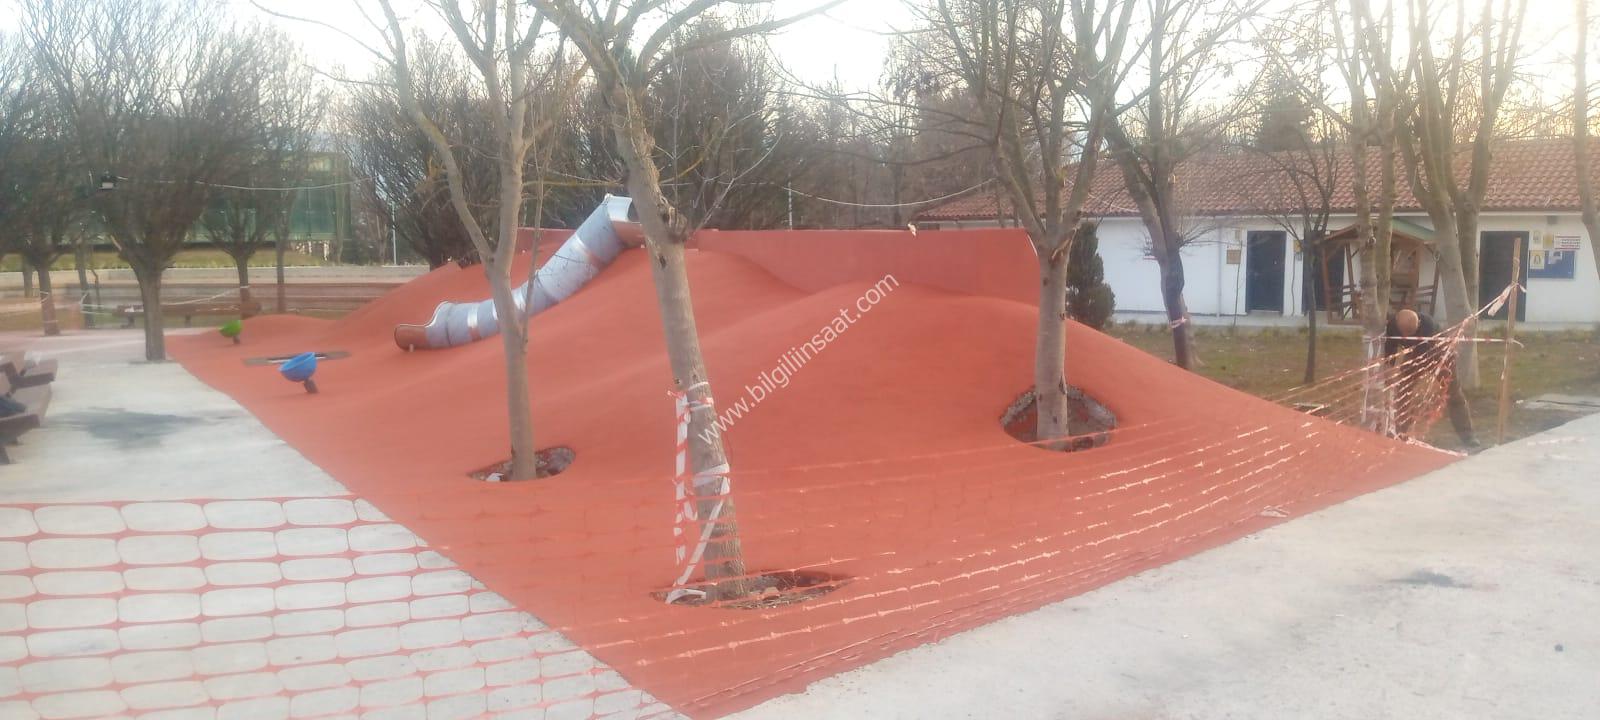 Bolu Municipality – Earthquake Monument and Museum Ground Project